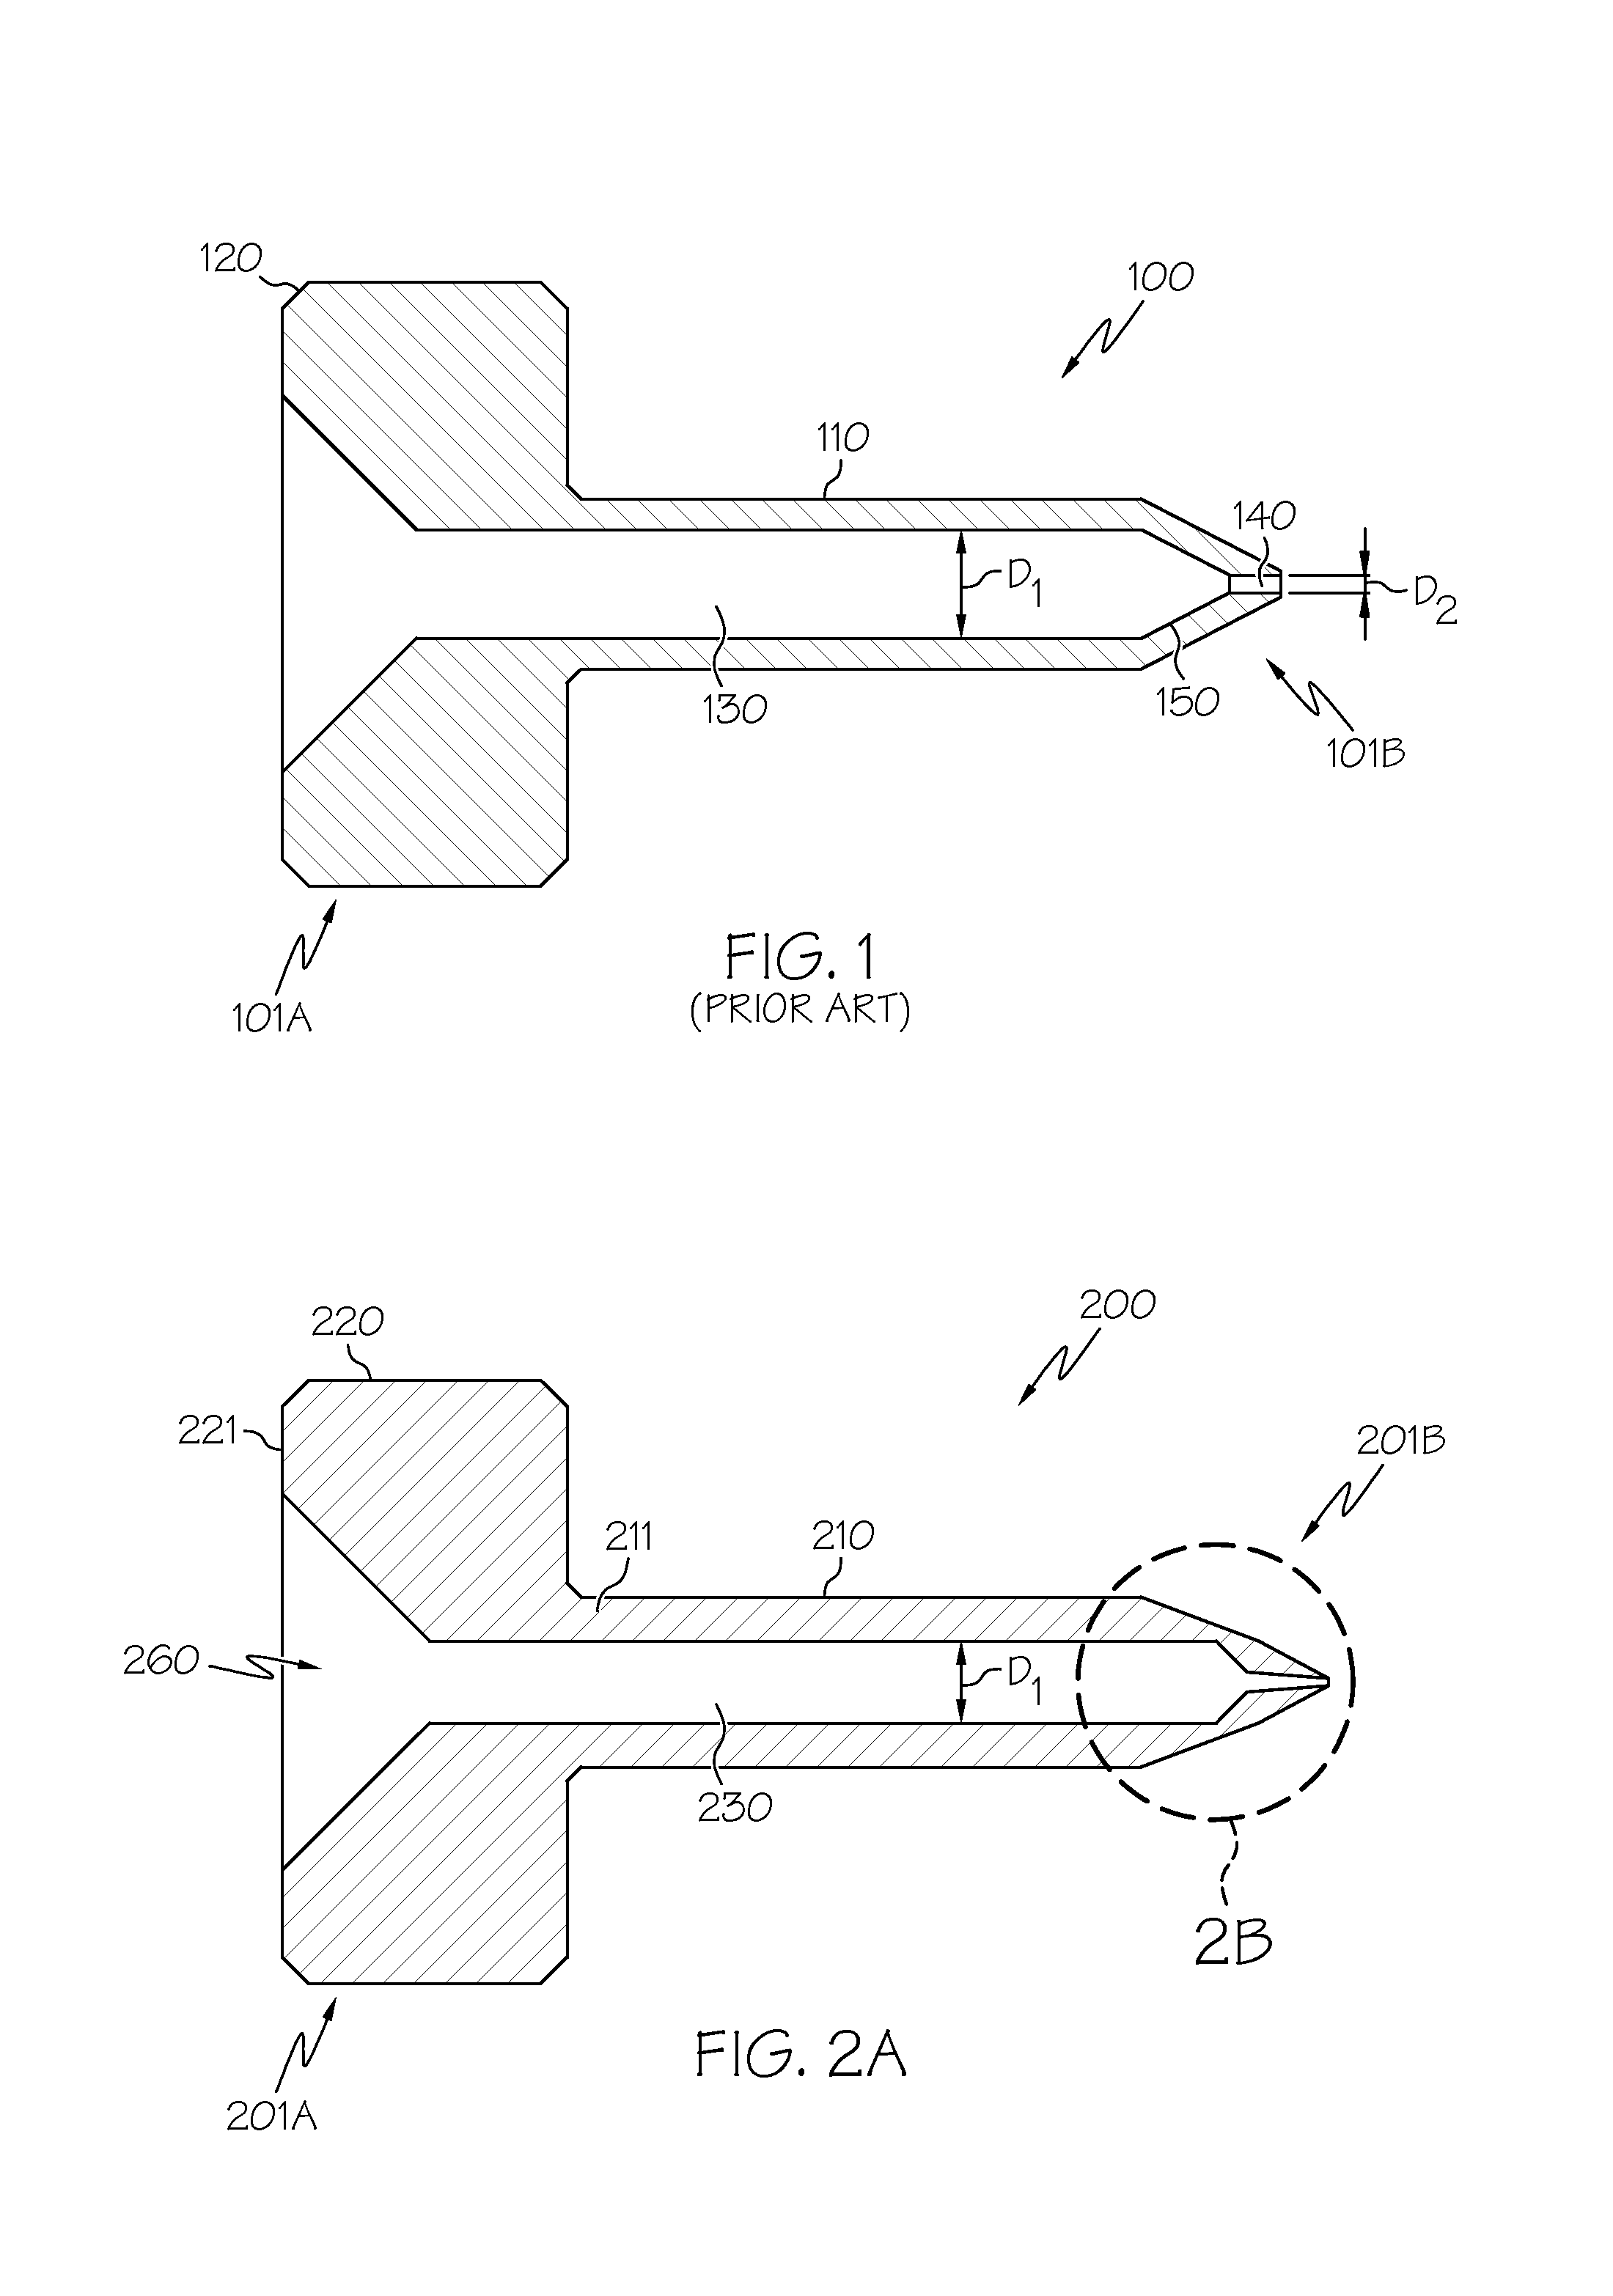 Method for manufacturing a material dispense tip